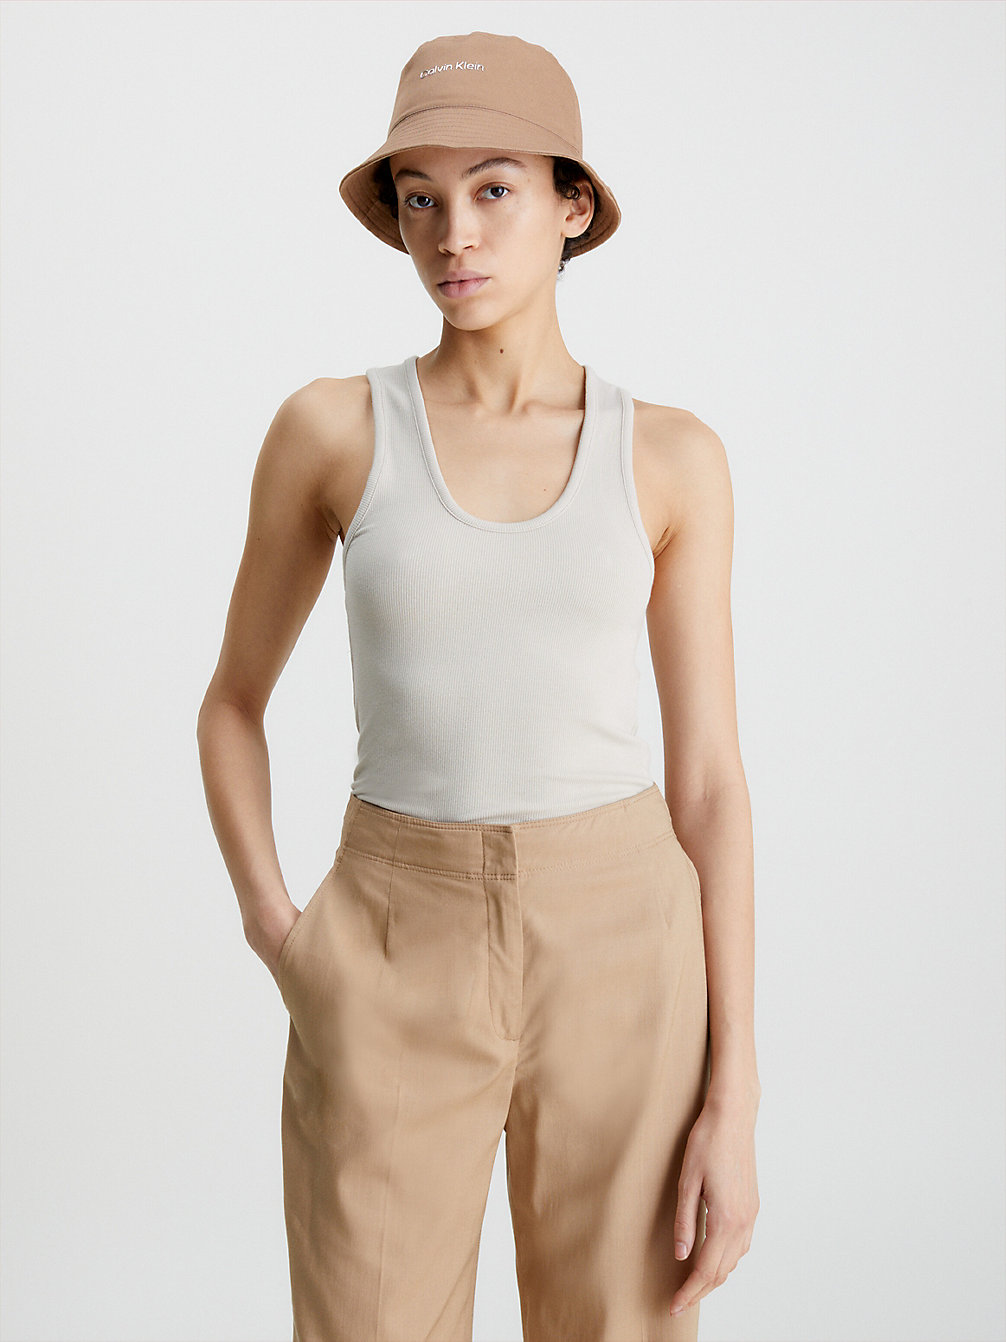 SMOOTH BEIGE Skinny Ribbed Modal Tank Top undefined women Calvin Klein